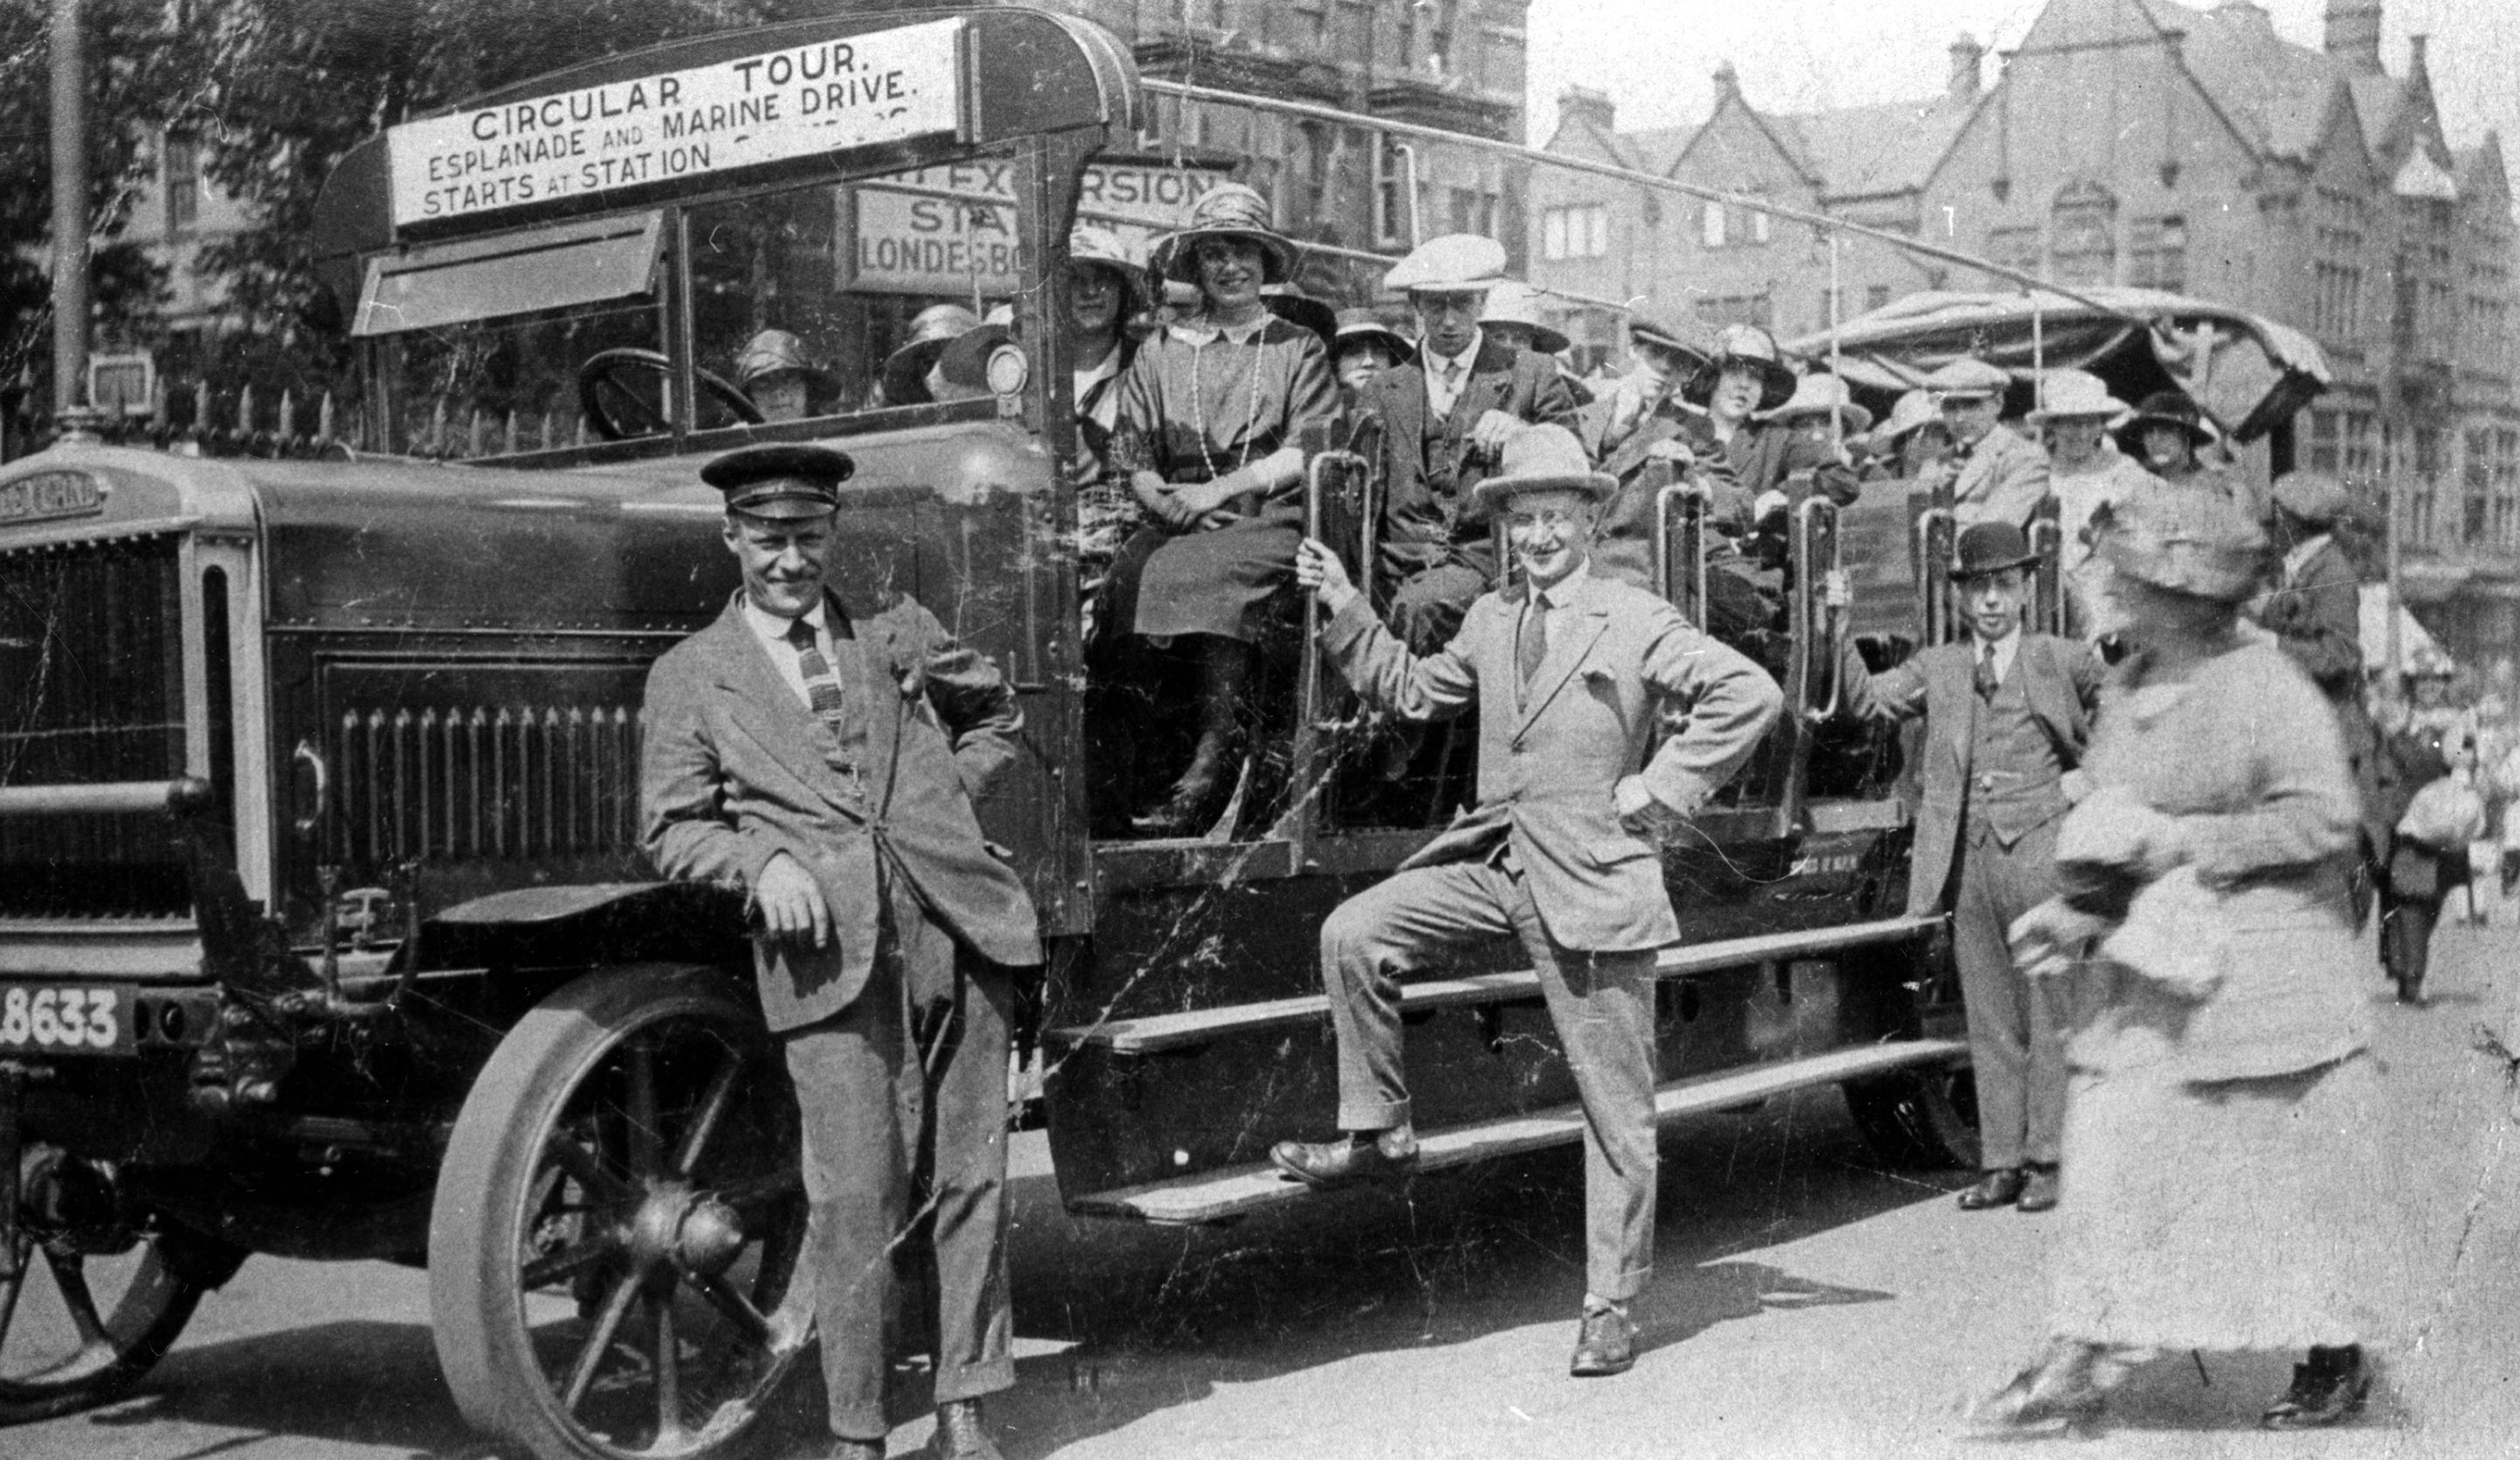 A Leyland Charabanc makes ready for a circular tour of Scarborough (circa 1920s). From the Bertram Unné photographic collection.